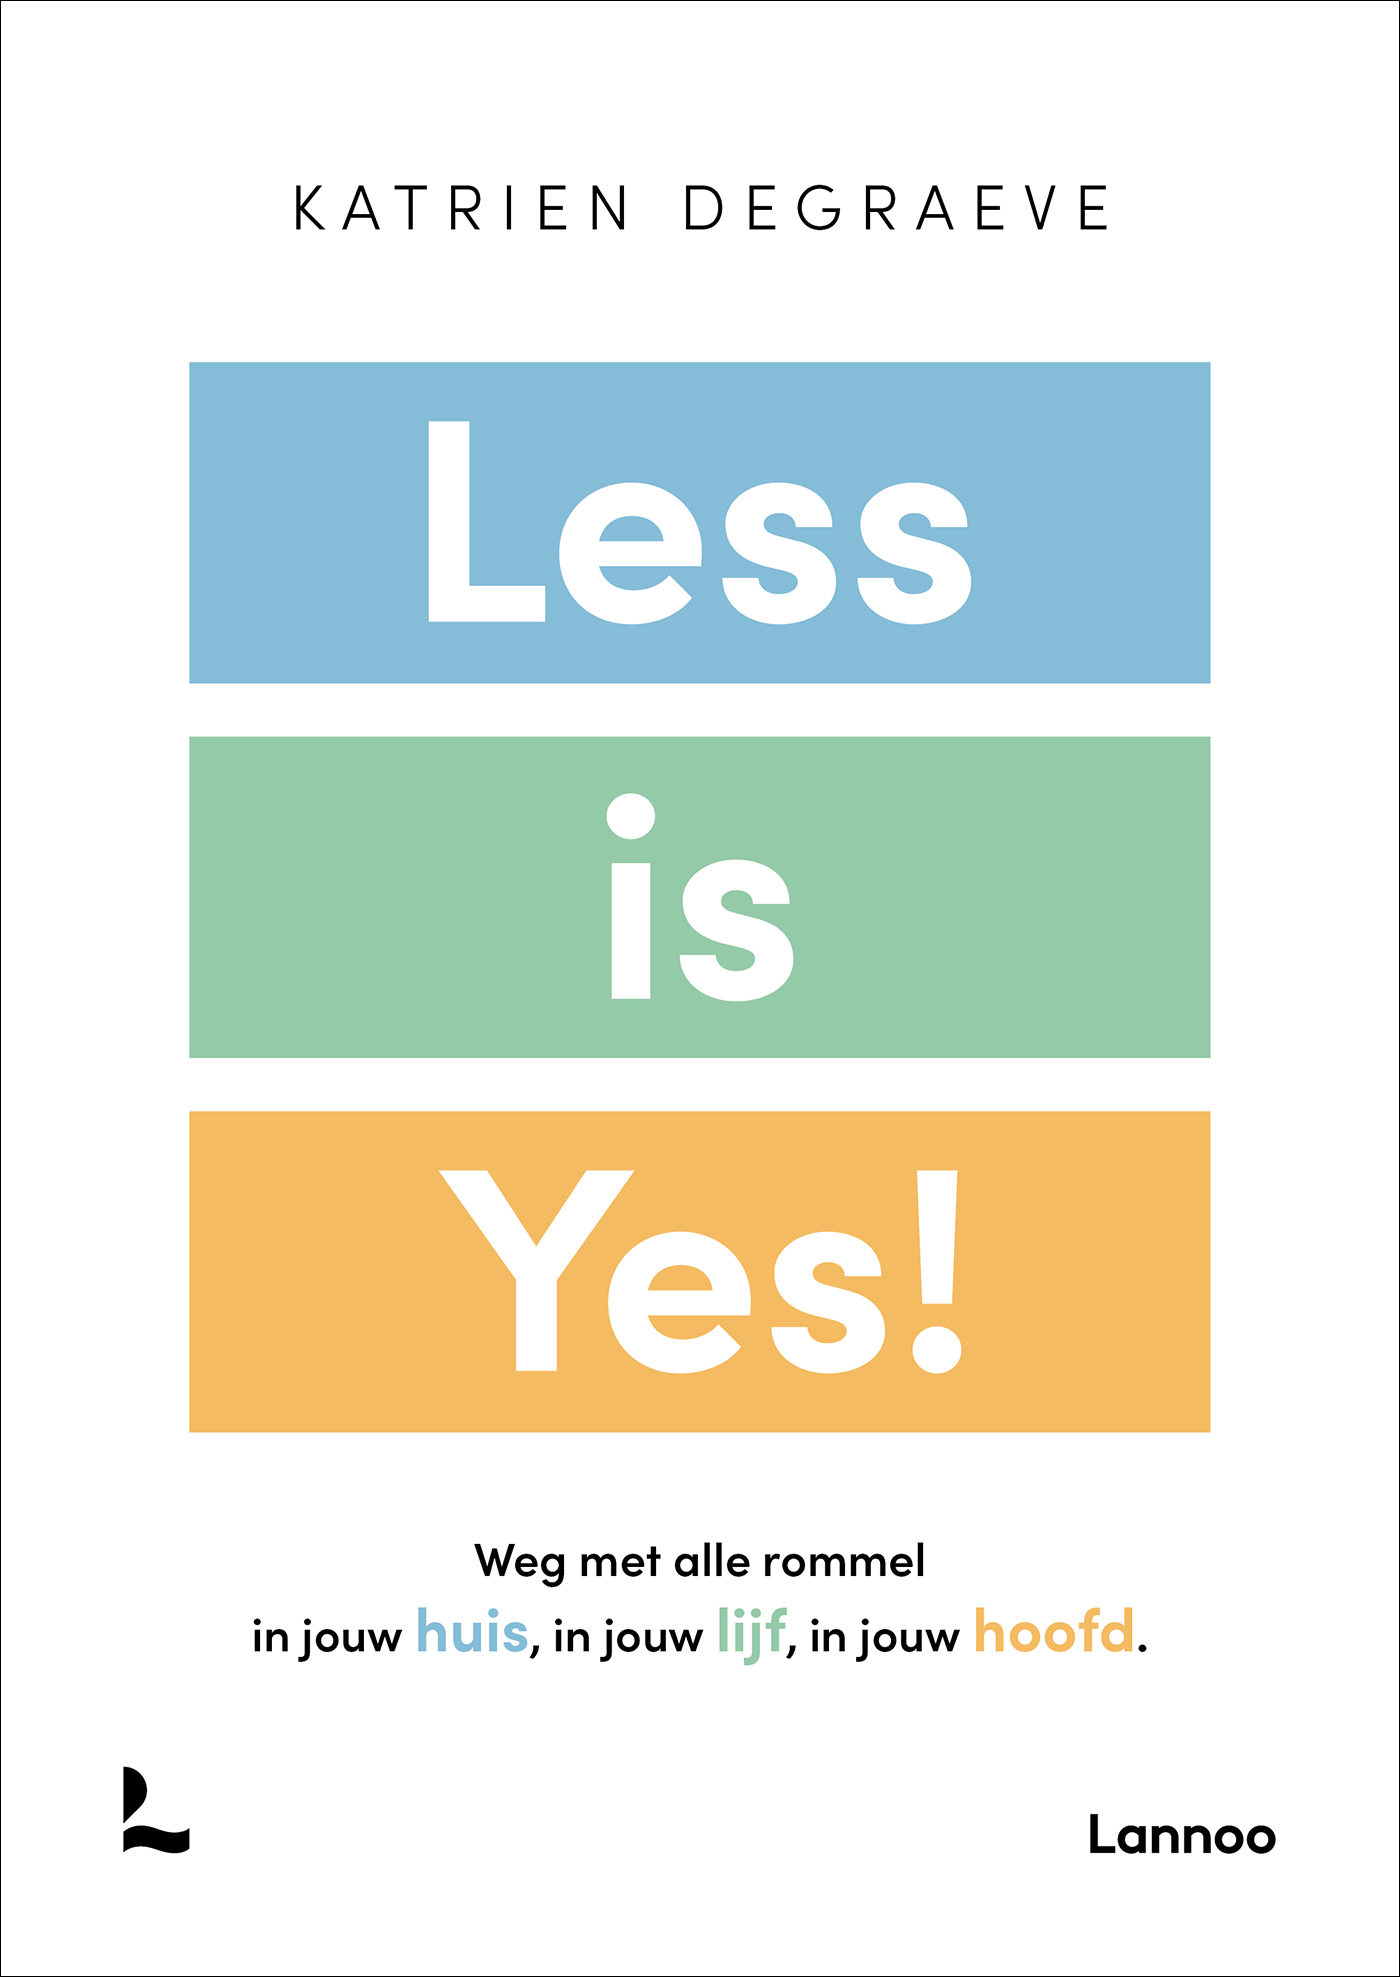 Less is yes!